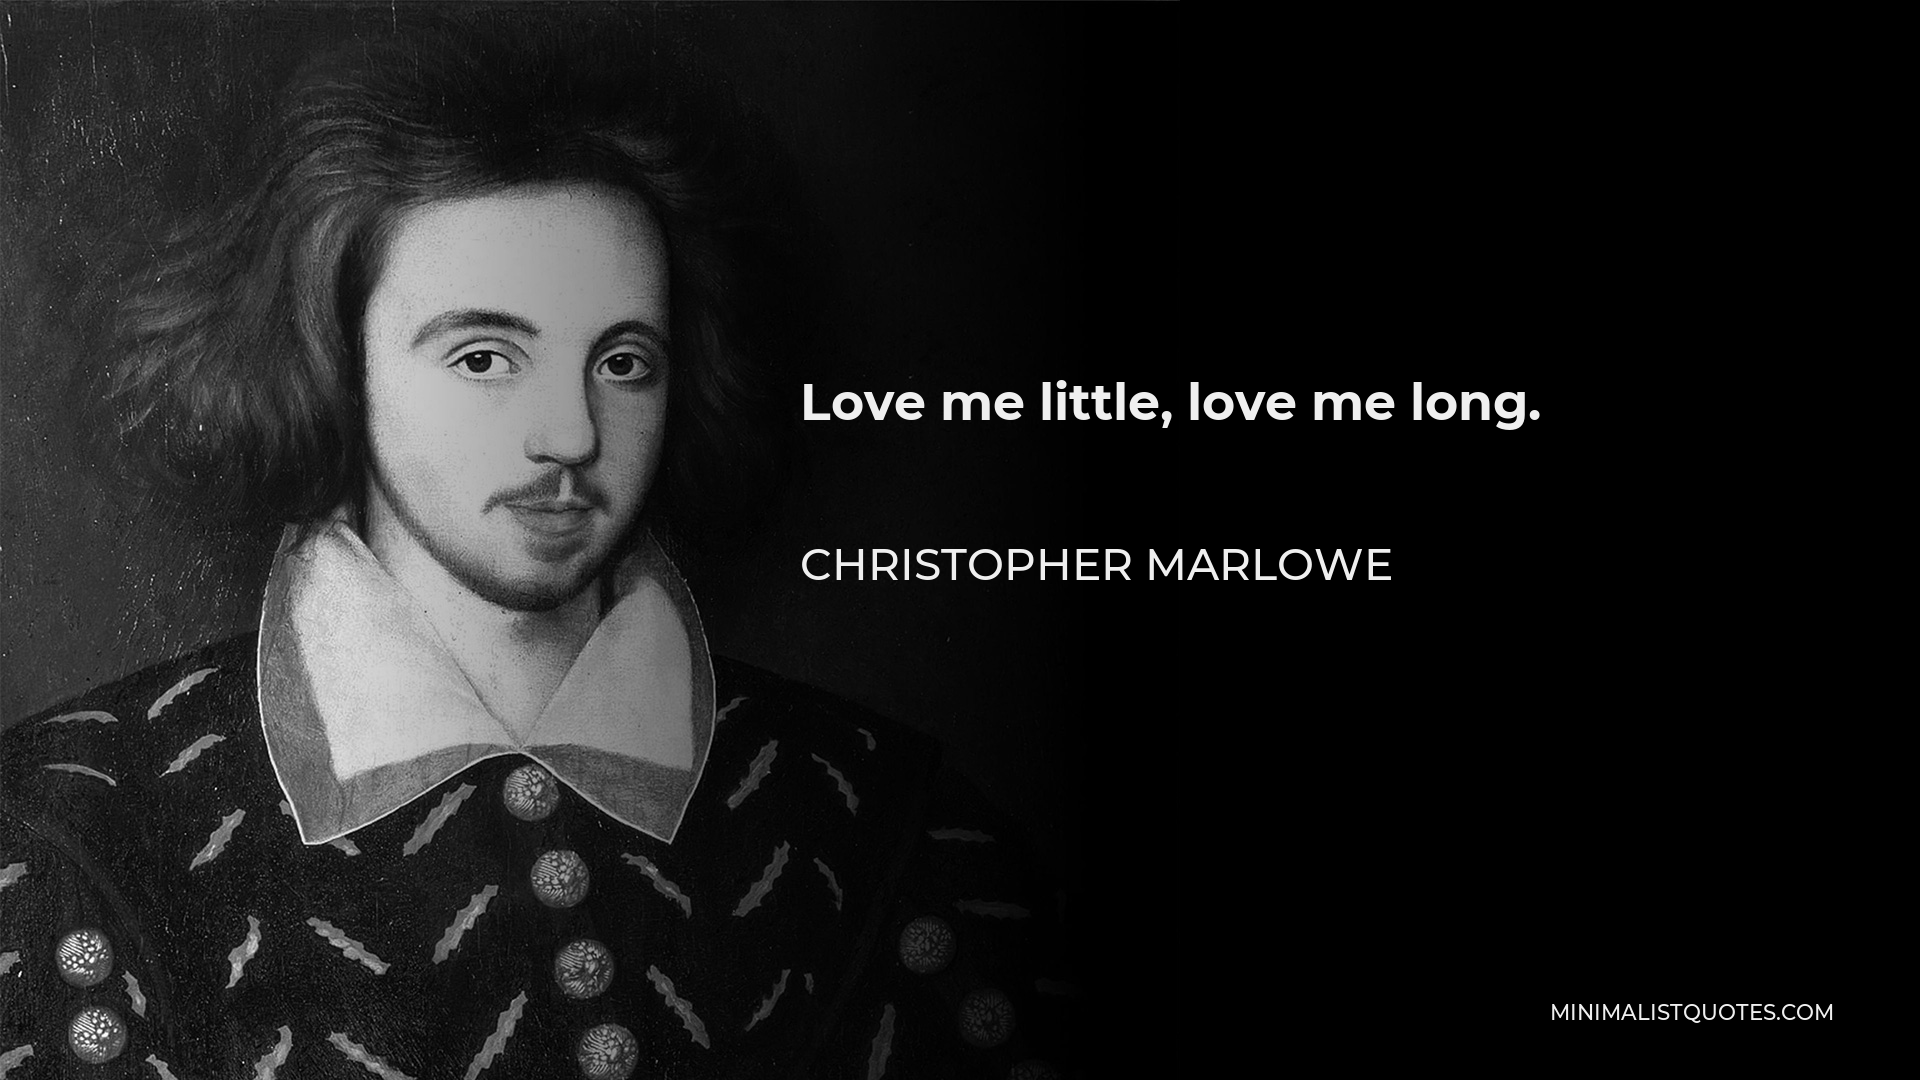 Christopher Marlowe Quote - Love me little, love me long.